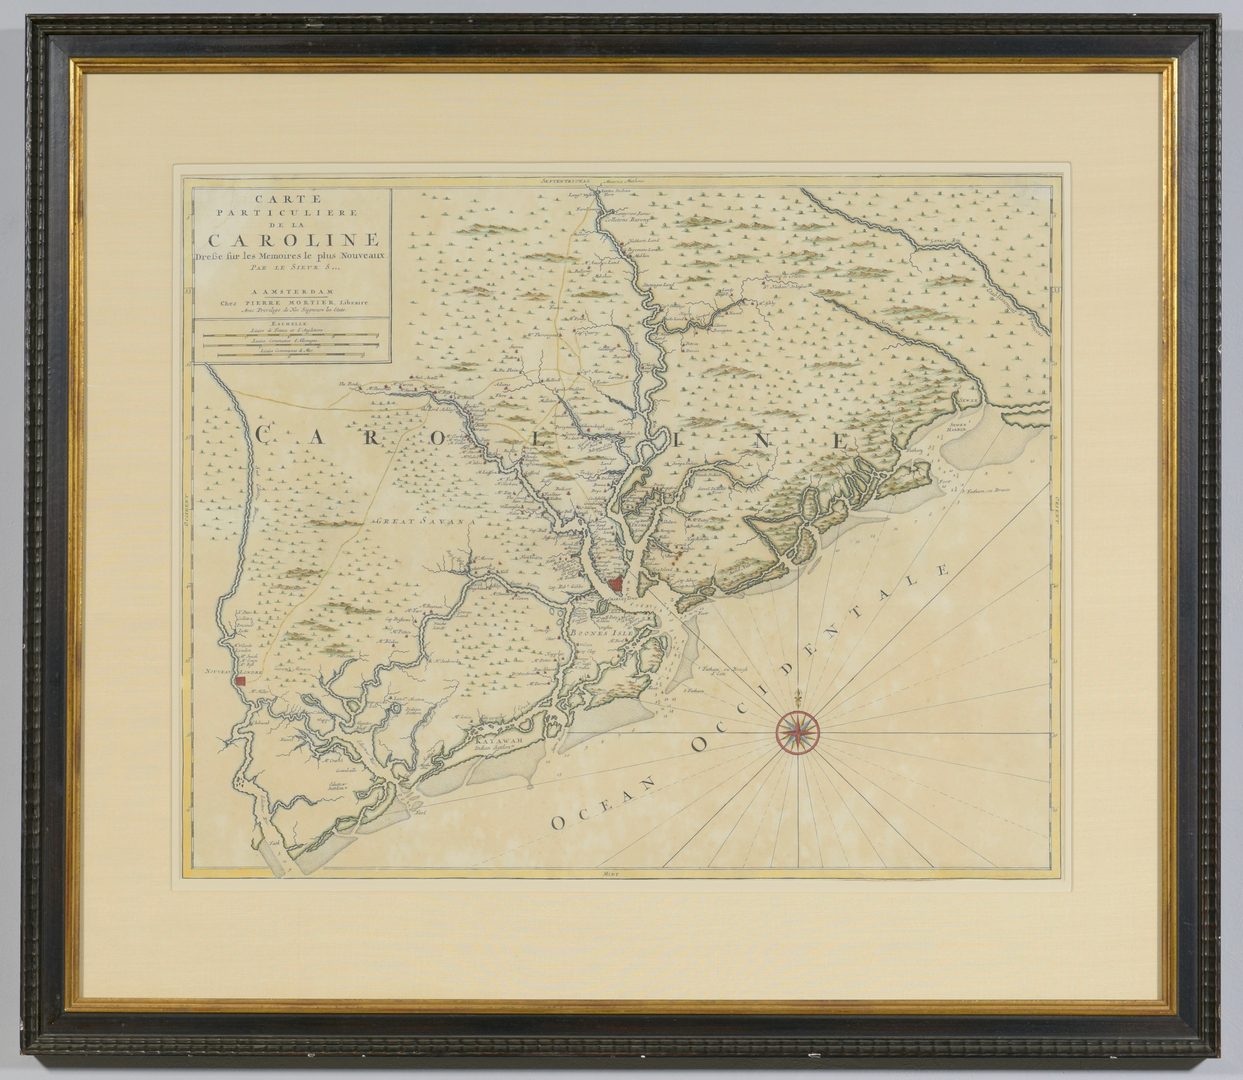 Lot 265: Important Early South Carolina Map 1696 | Case Auctions